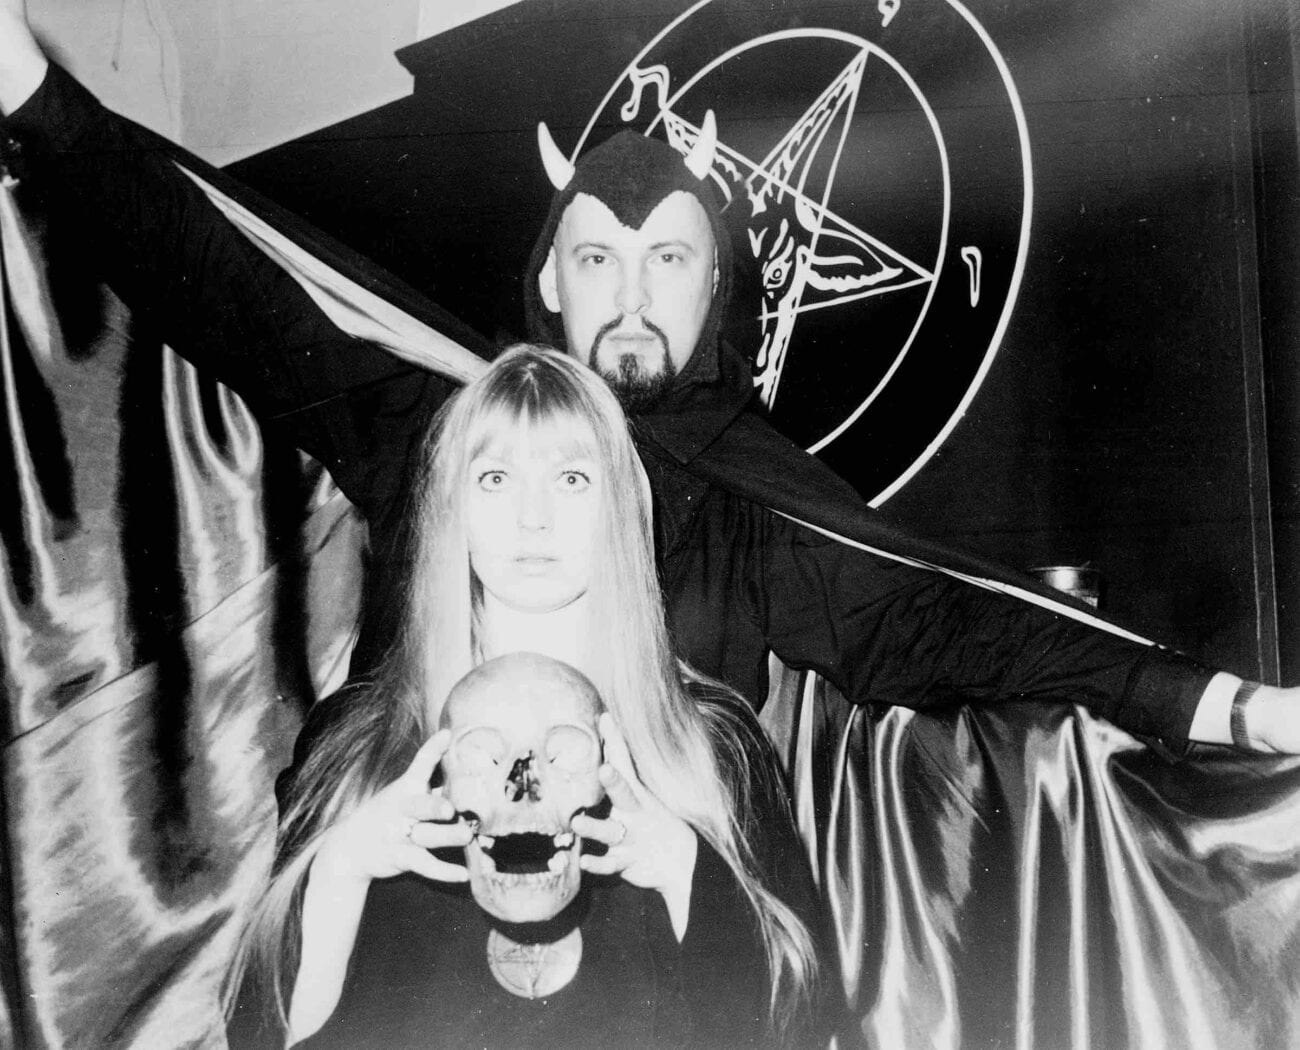 Formed by occultist Anton LaVey in 1966 was The Church of Satan. Here's everything you need to know about Anton LaVey.